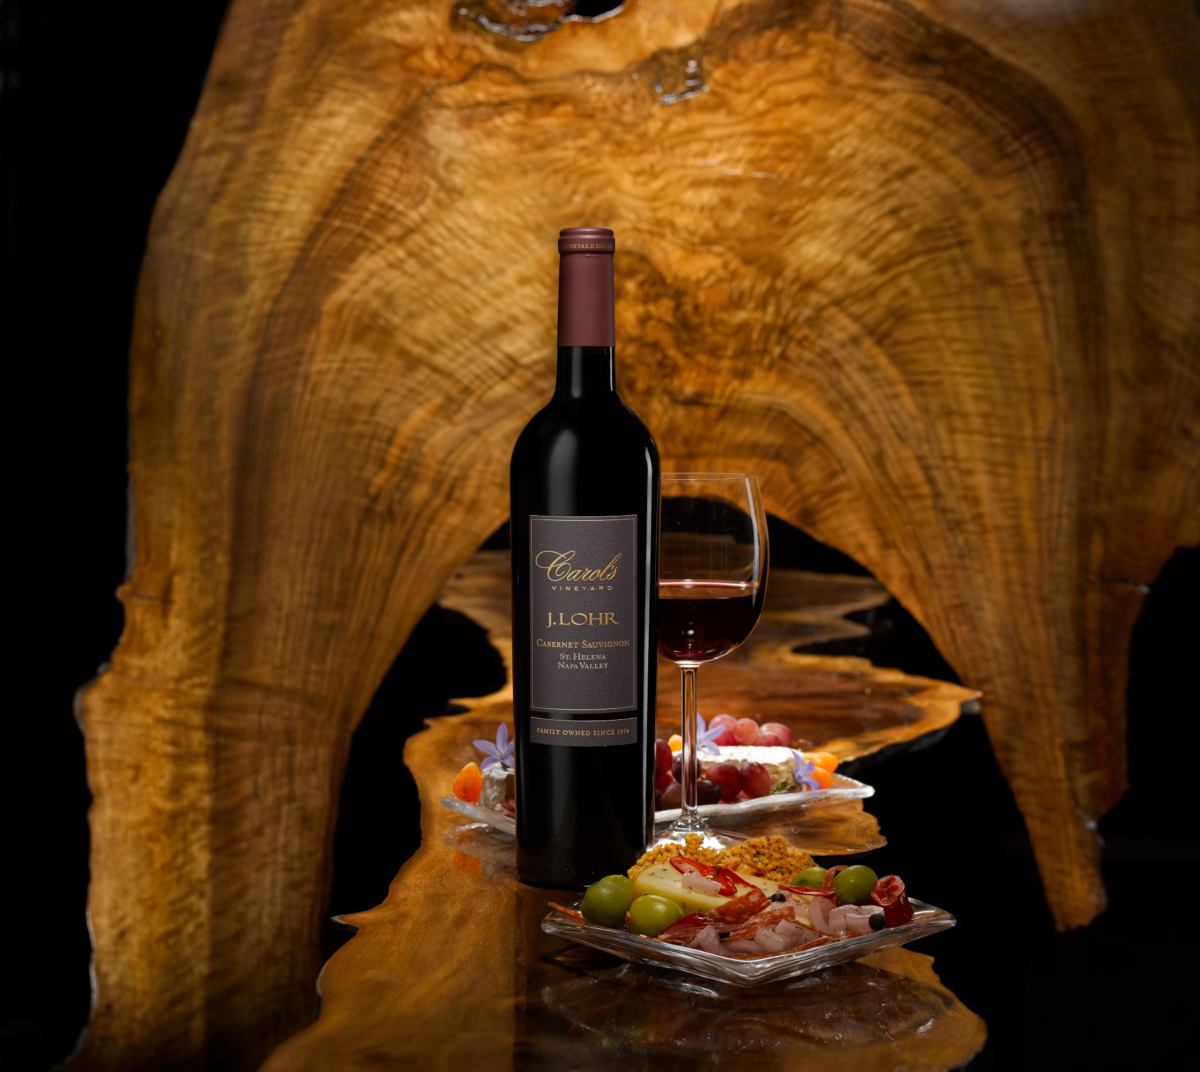 J. Lohr Carol's Vineyard Cabernet and plates of appetizers with a dark wood background